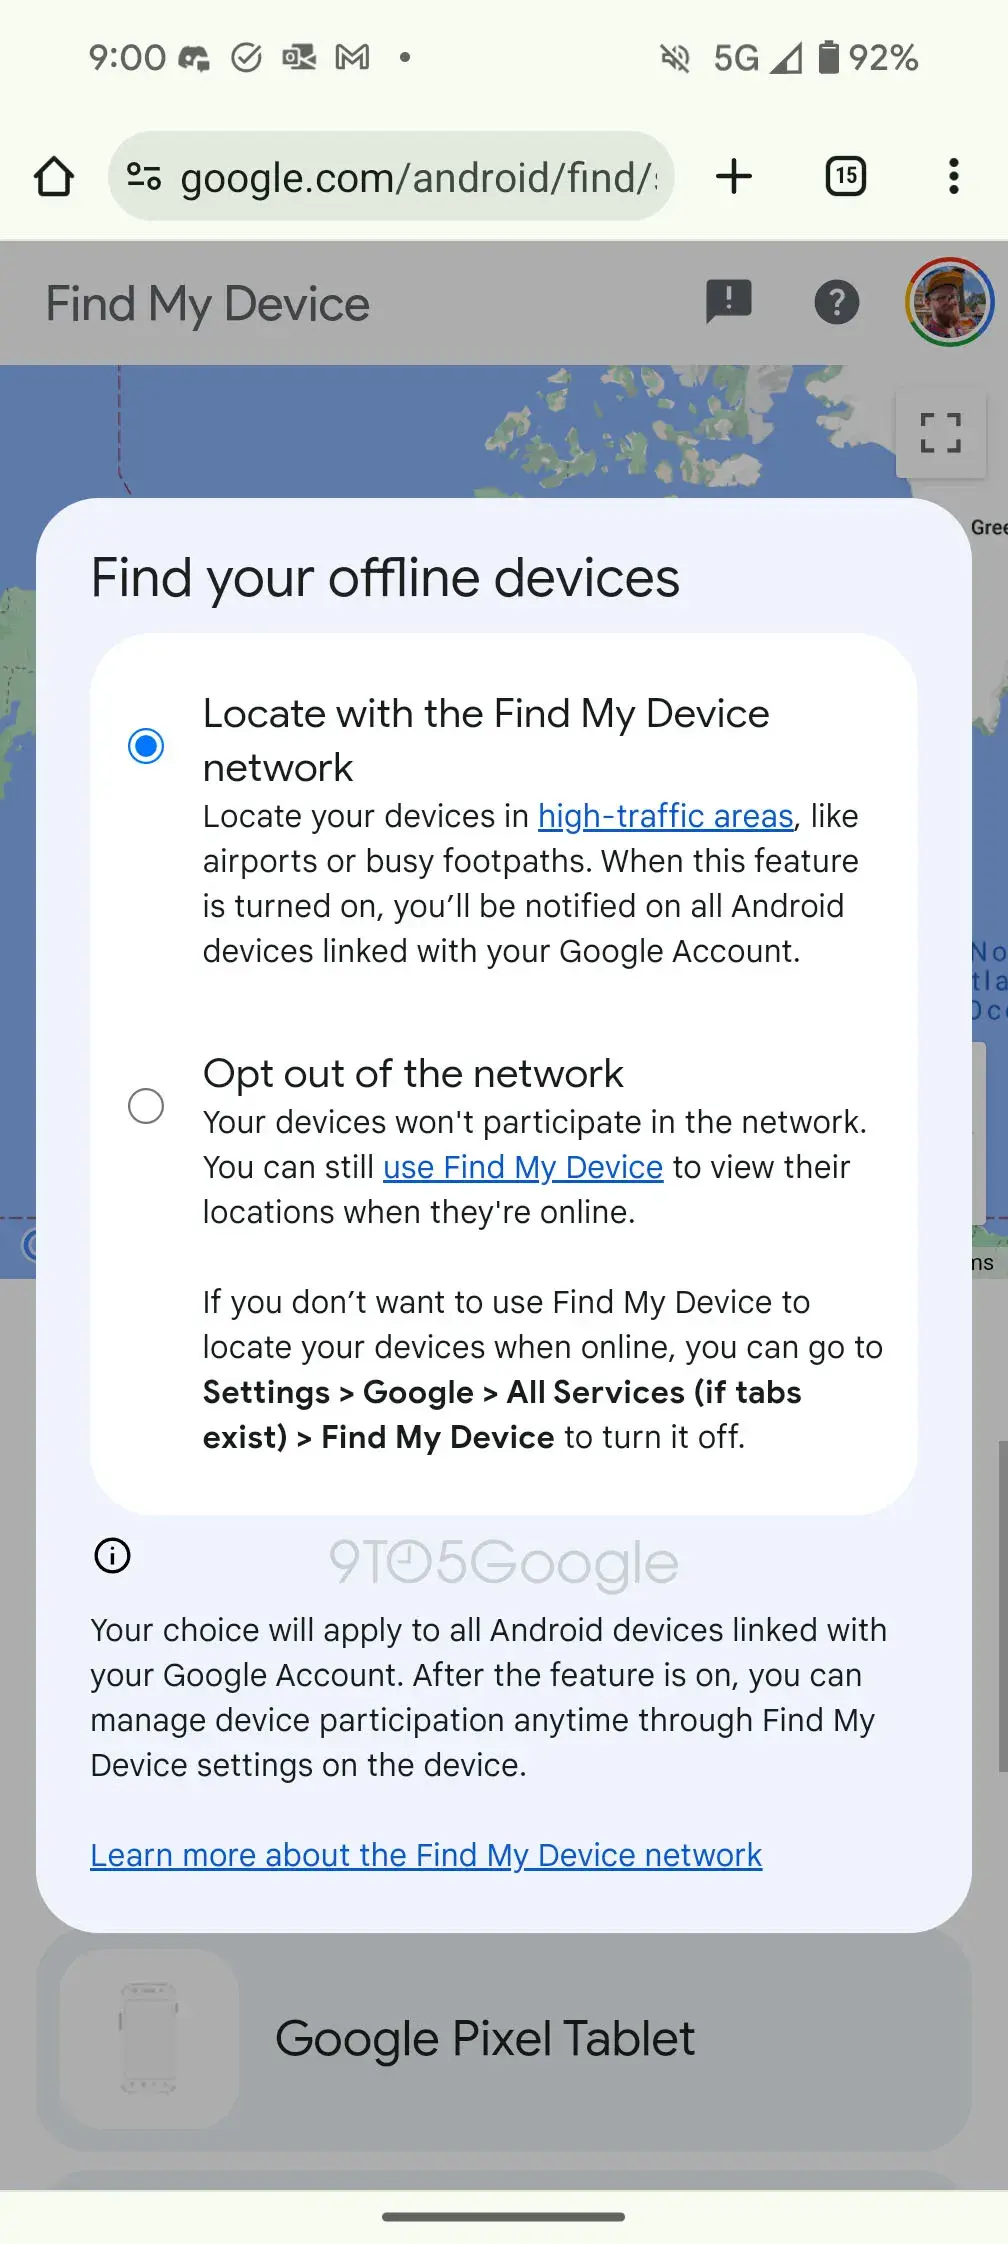 Google Announces Find My Device: A New Bluetooth-Based Network for Locating Phones and Accessories